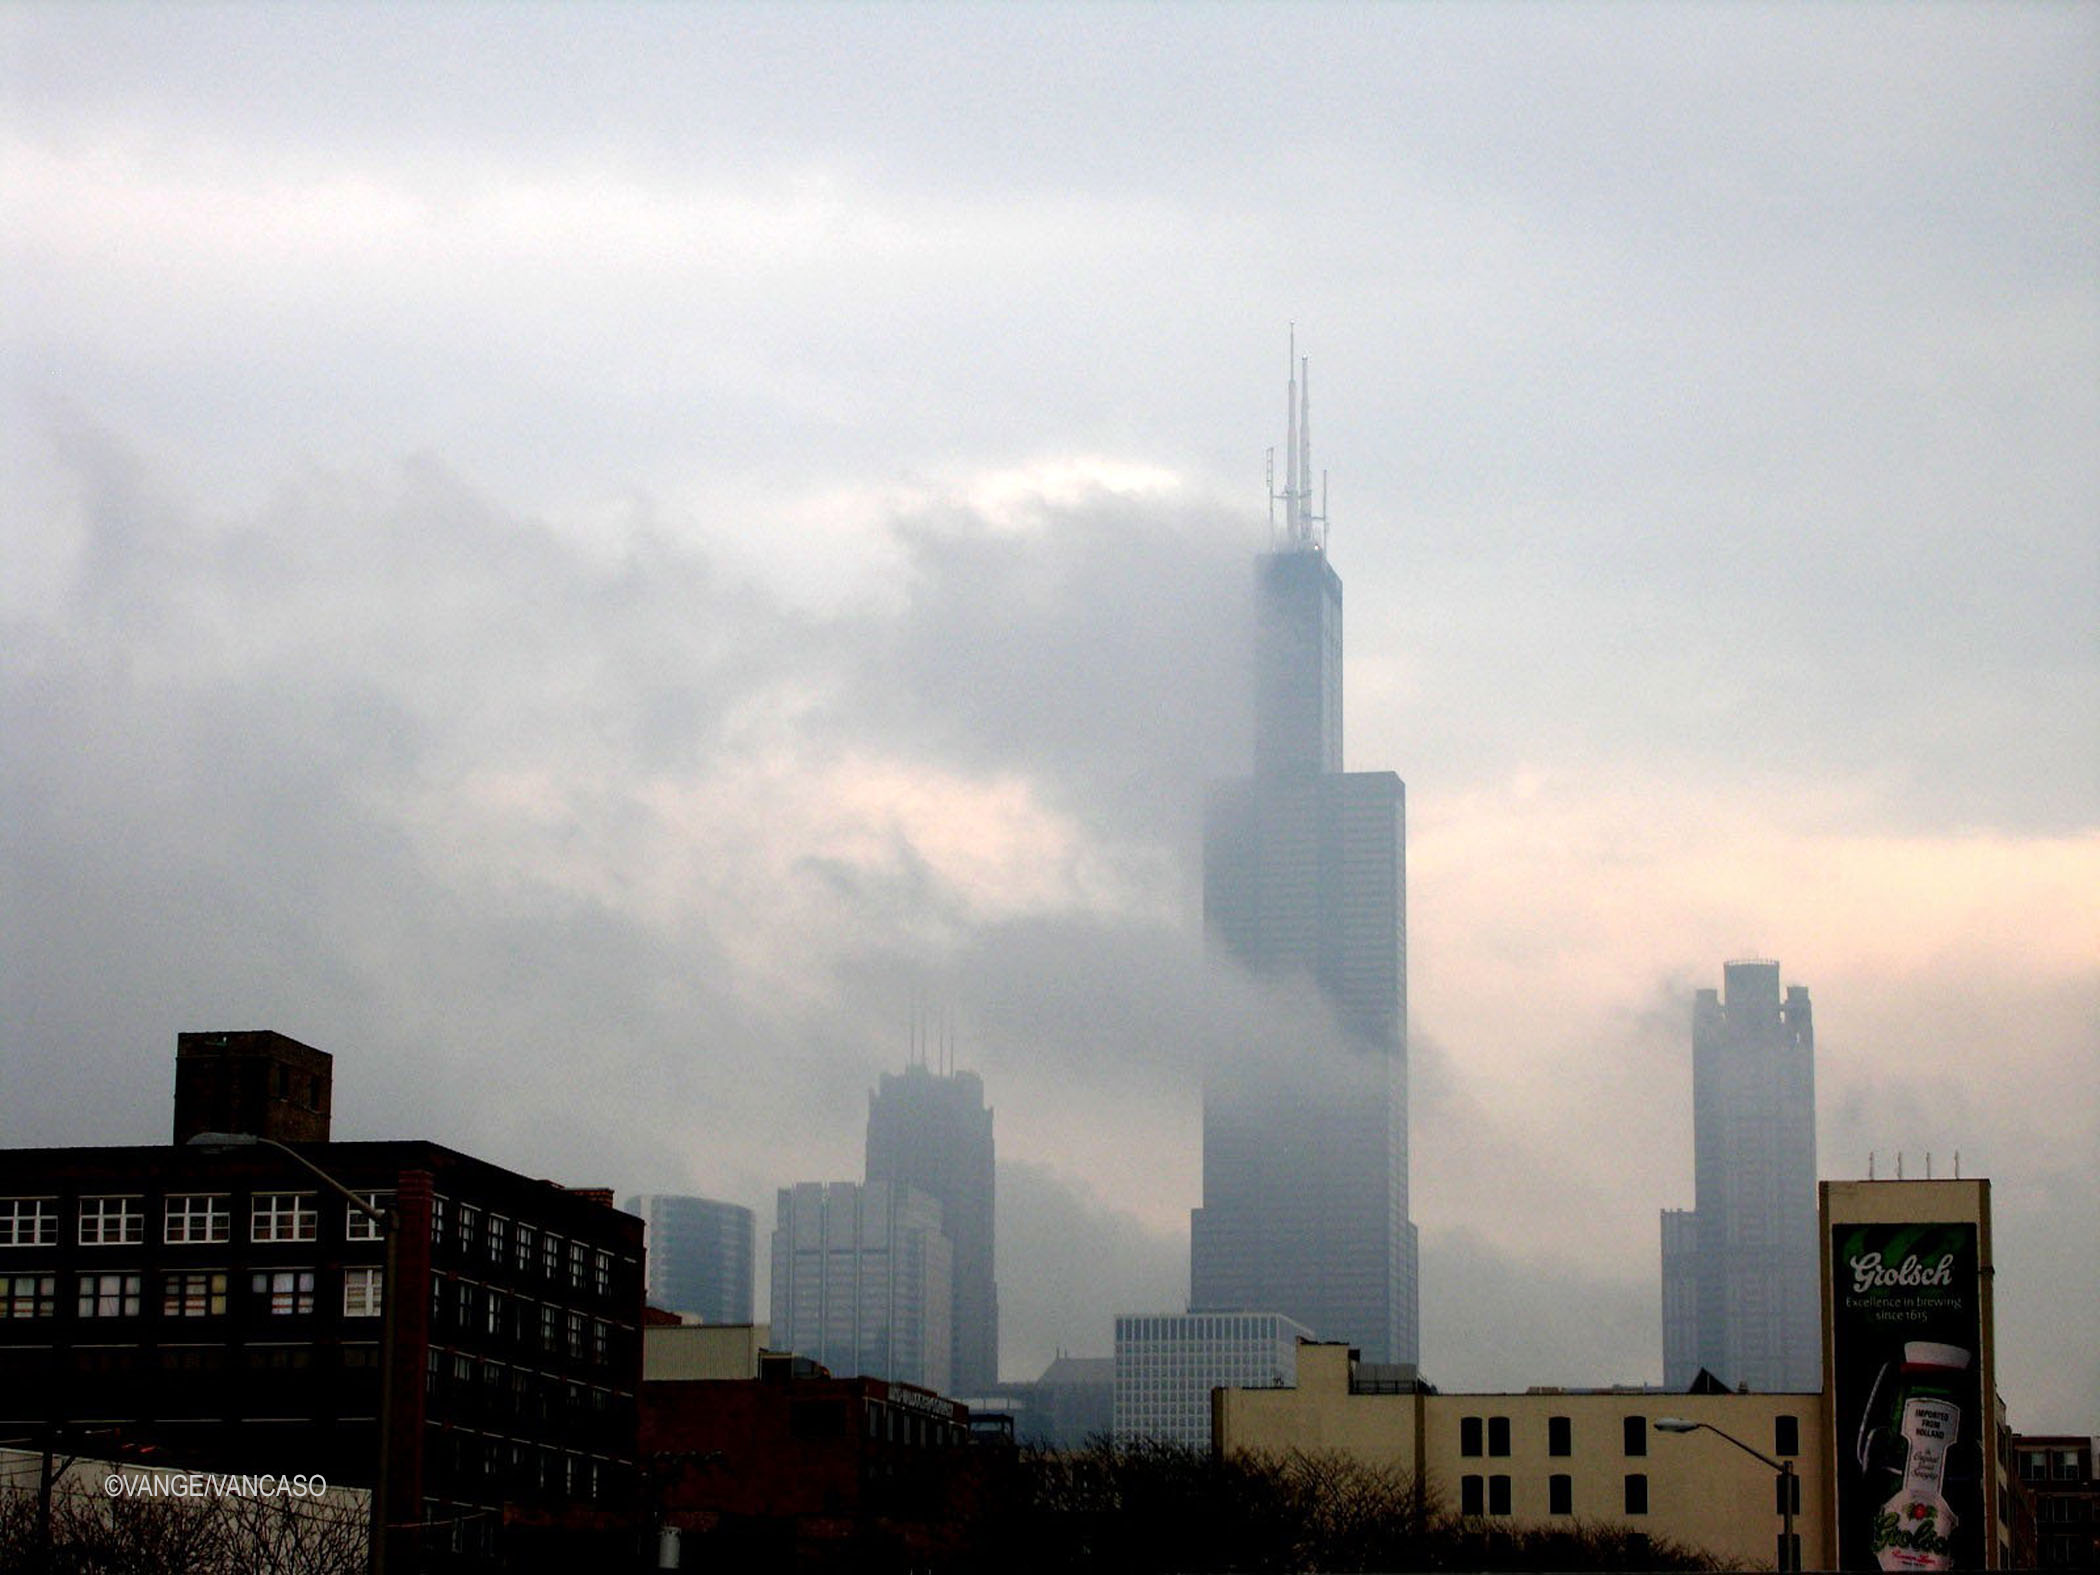 Sears Tower or Willis Tower in Chicago, Illinois